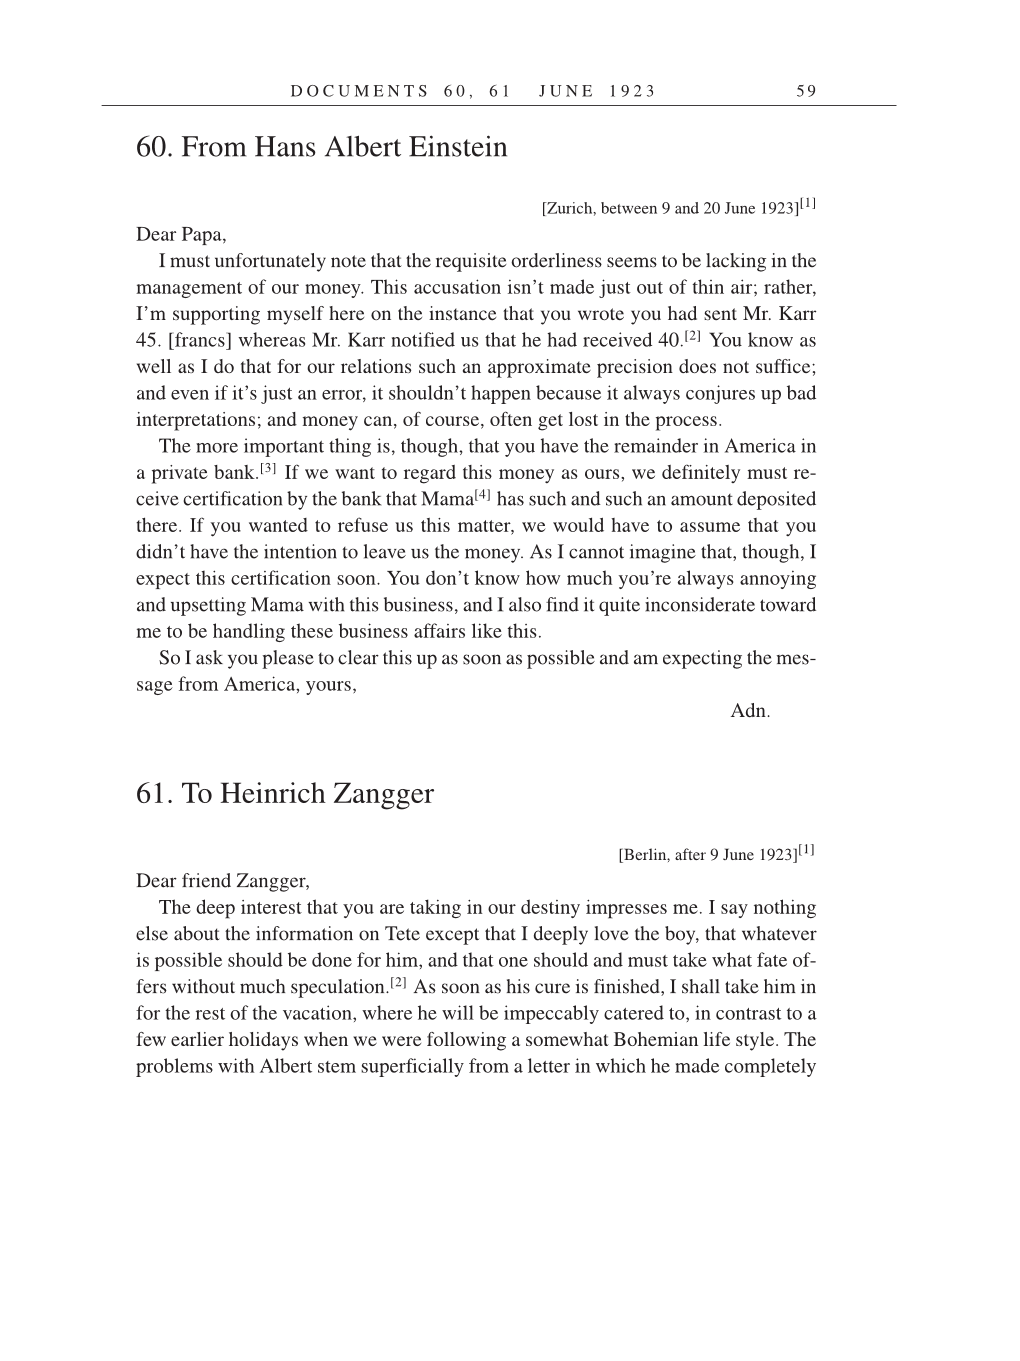 Volume 14: The Berlin Years: Writings & Correspondence, April 1923-May 1925 (English Translation Supplement) page 59